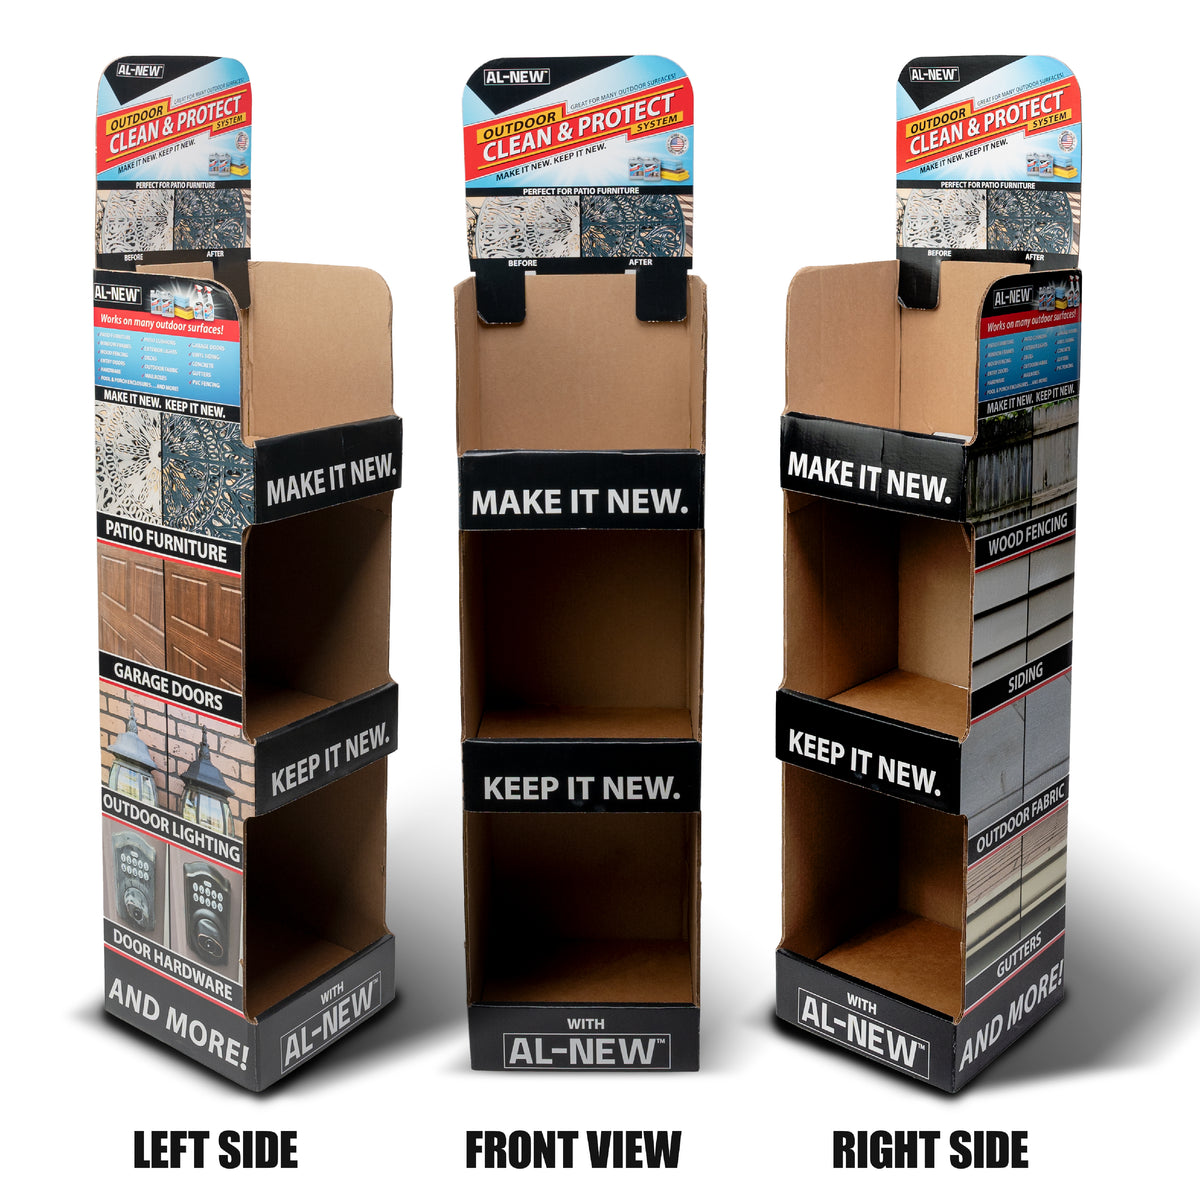 1021 - AL-NEW Retail Display - Corrugated Display Only (No Products)